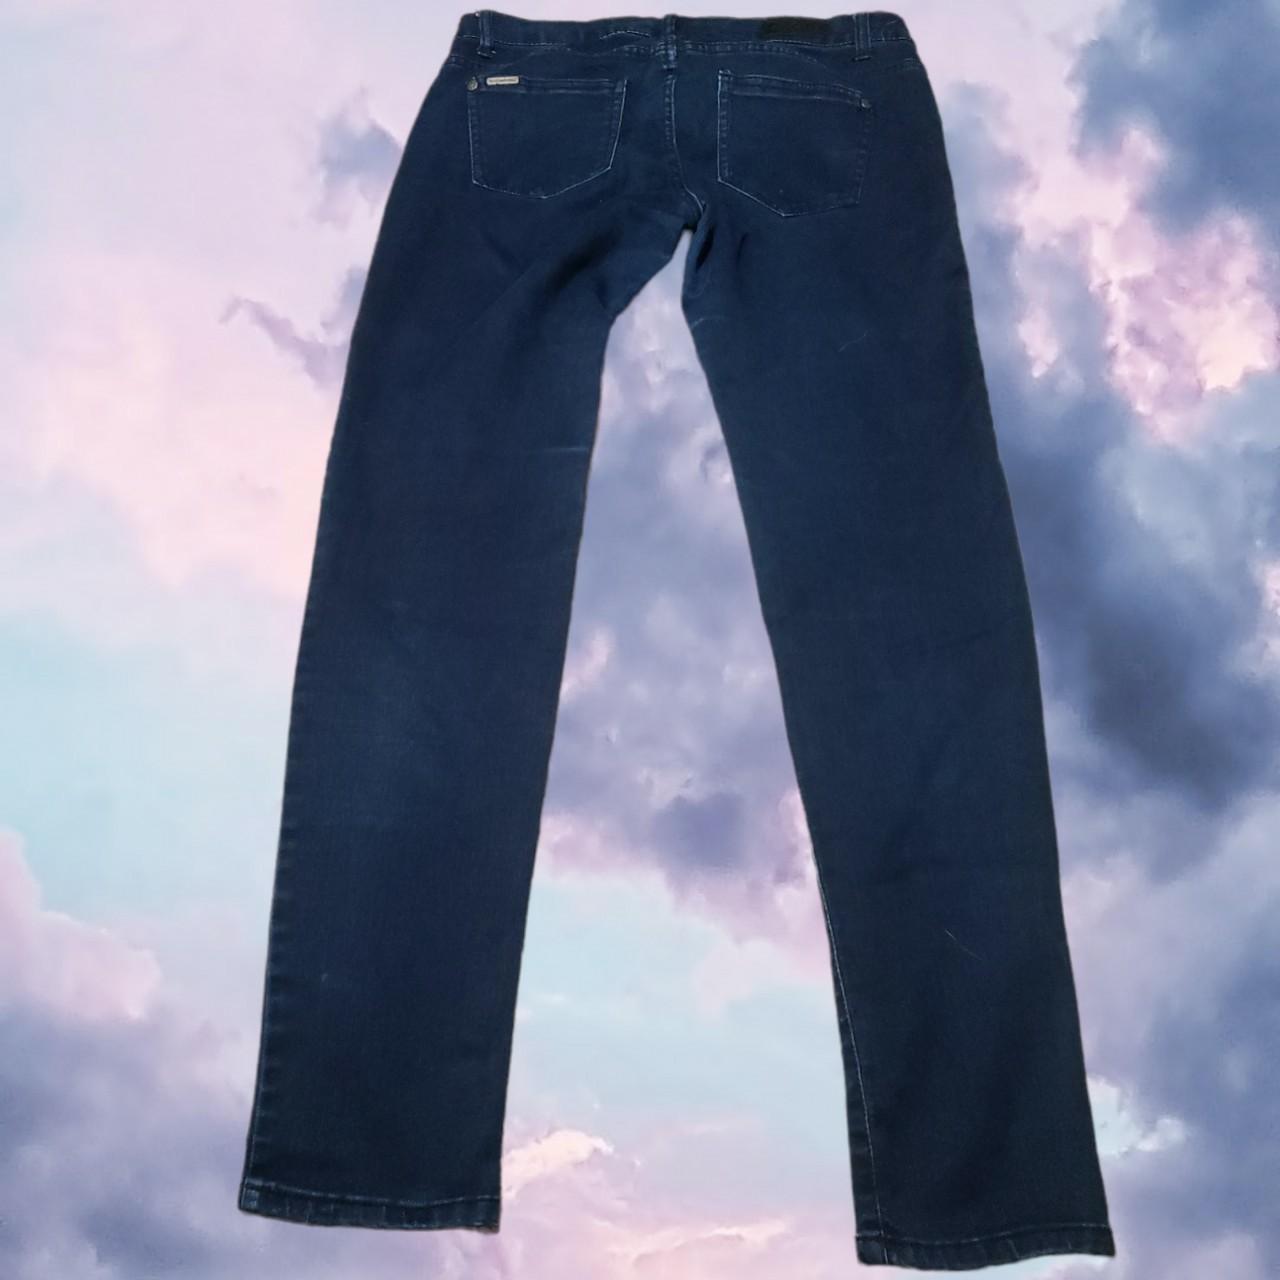 Product Image 2 - Celebrity pink blue Jean's size